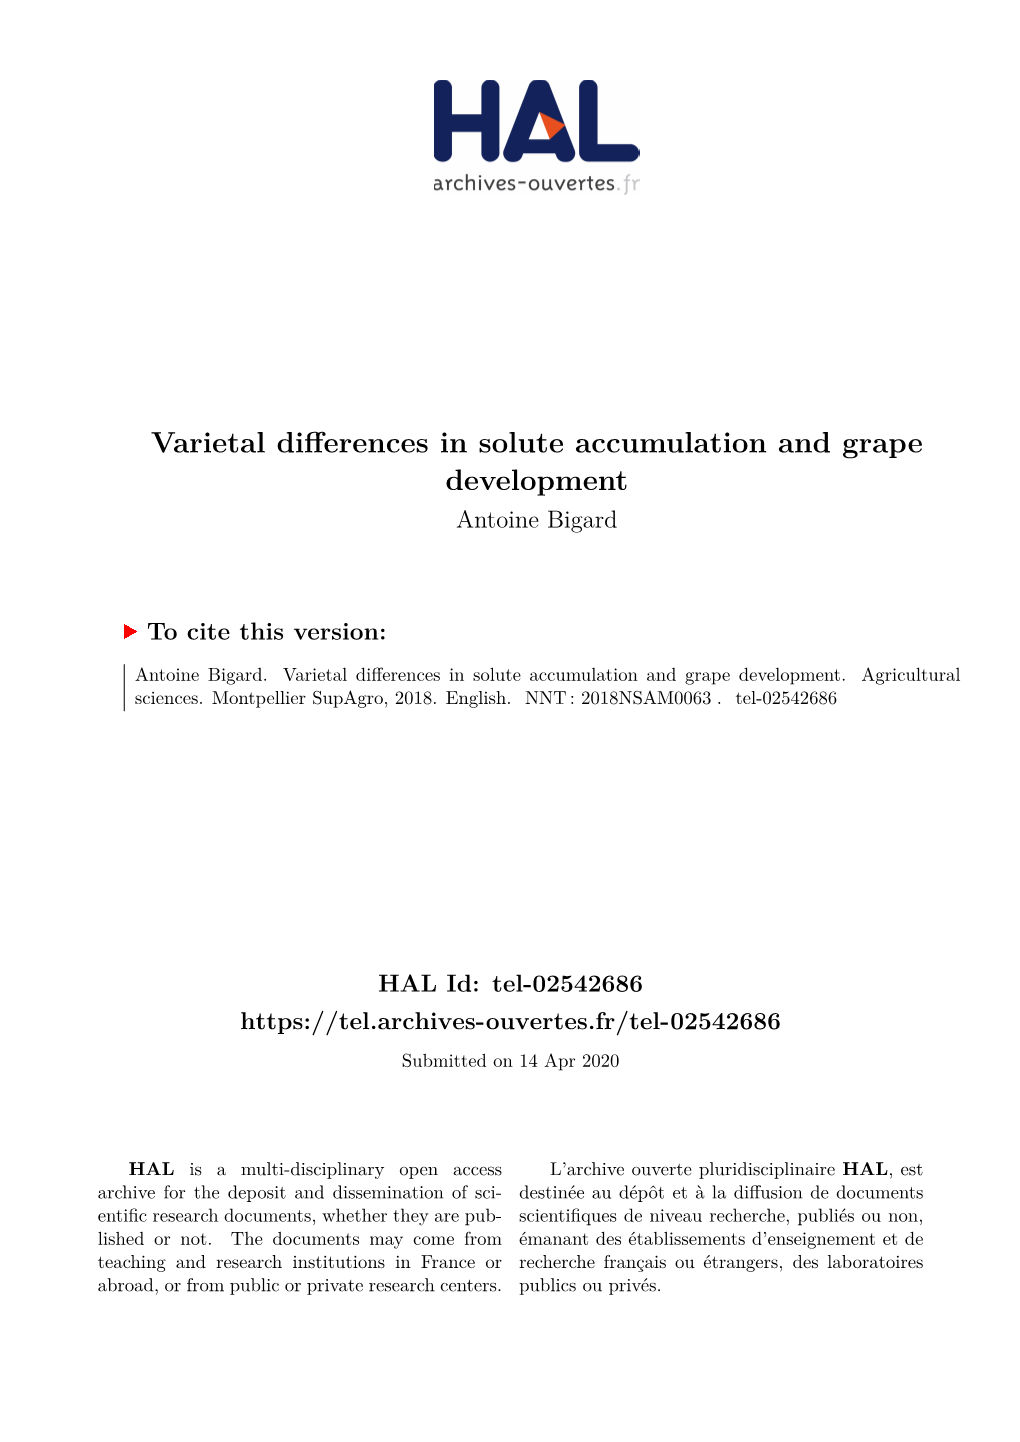 Varietal Differences in Solute Accumulation and Grape Development Antoine Bigard